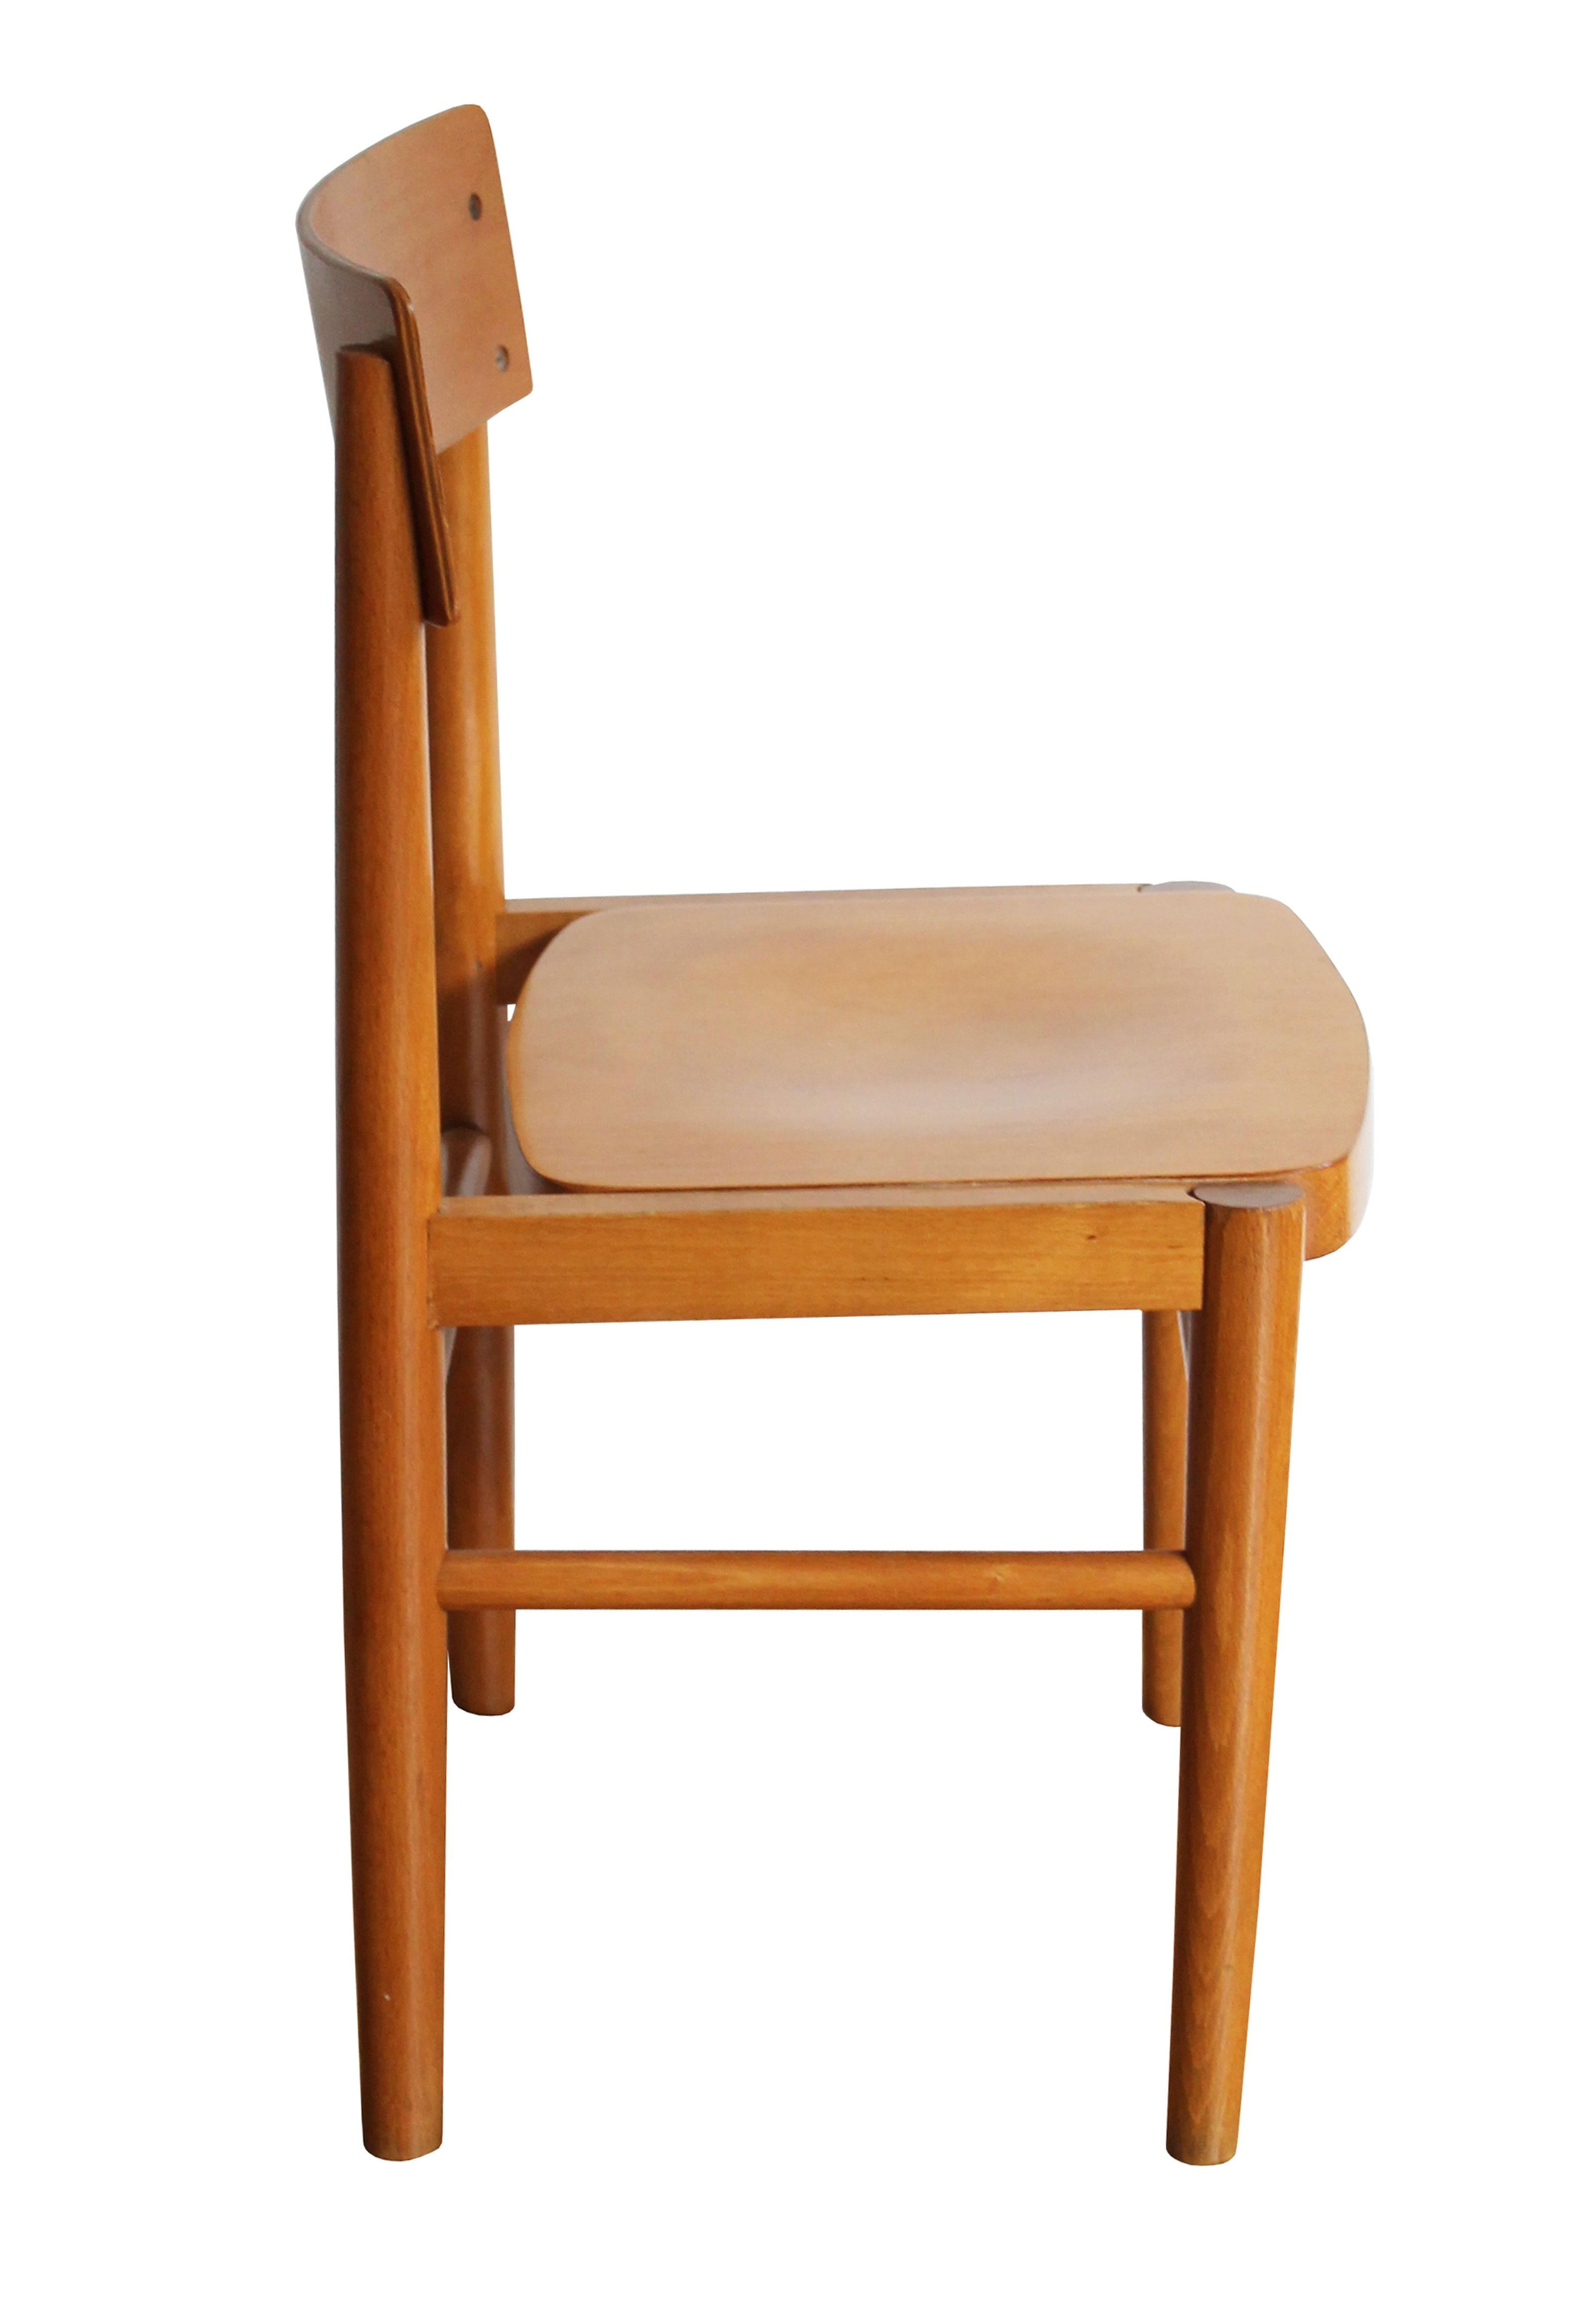 A Mid-Century children’s chair made entirely of beech wood in a lovely light honeycomb colour . This piece was produced in the 1970’s by the renowned TON Furniture Company. Despite being designed and produced in former Czechoslovakia, these chairs